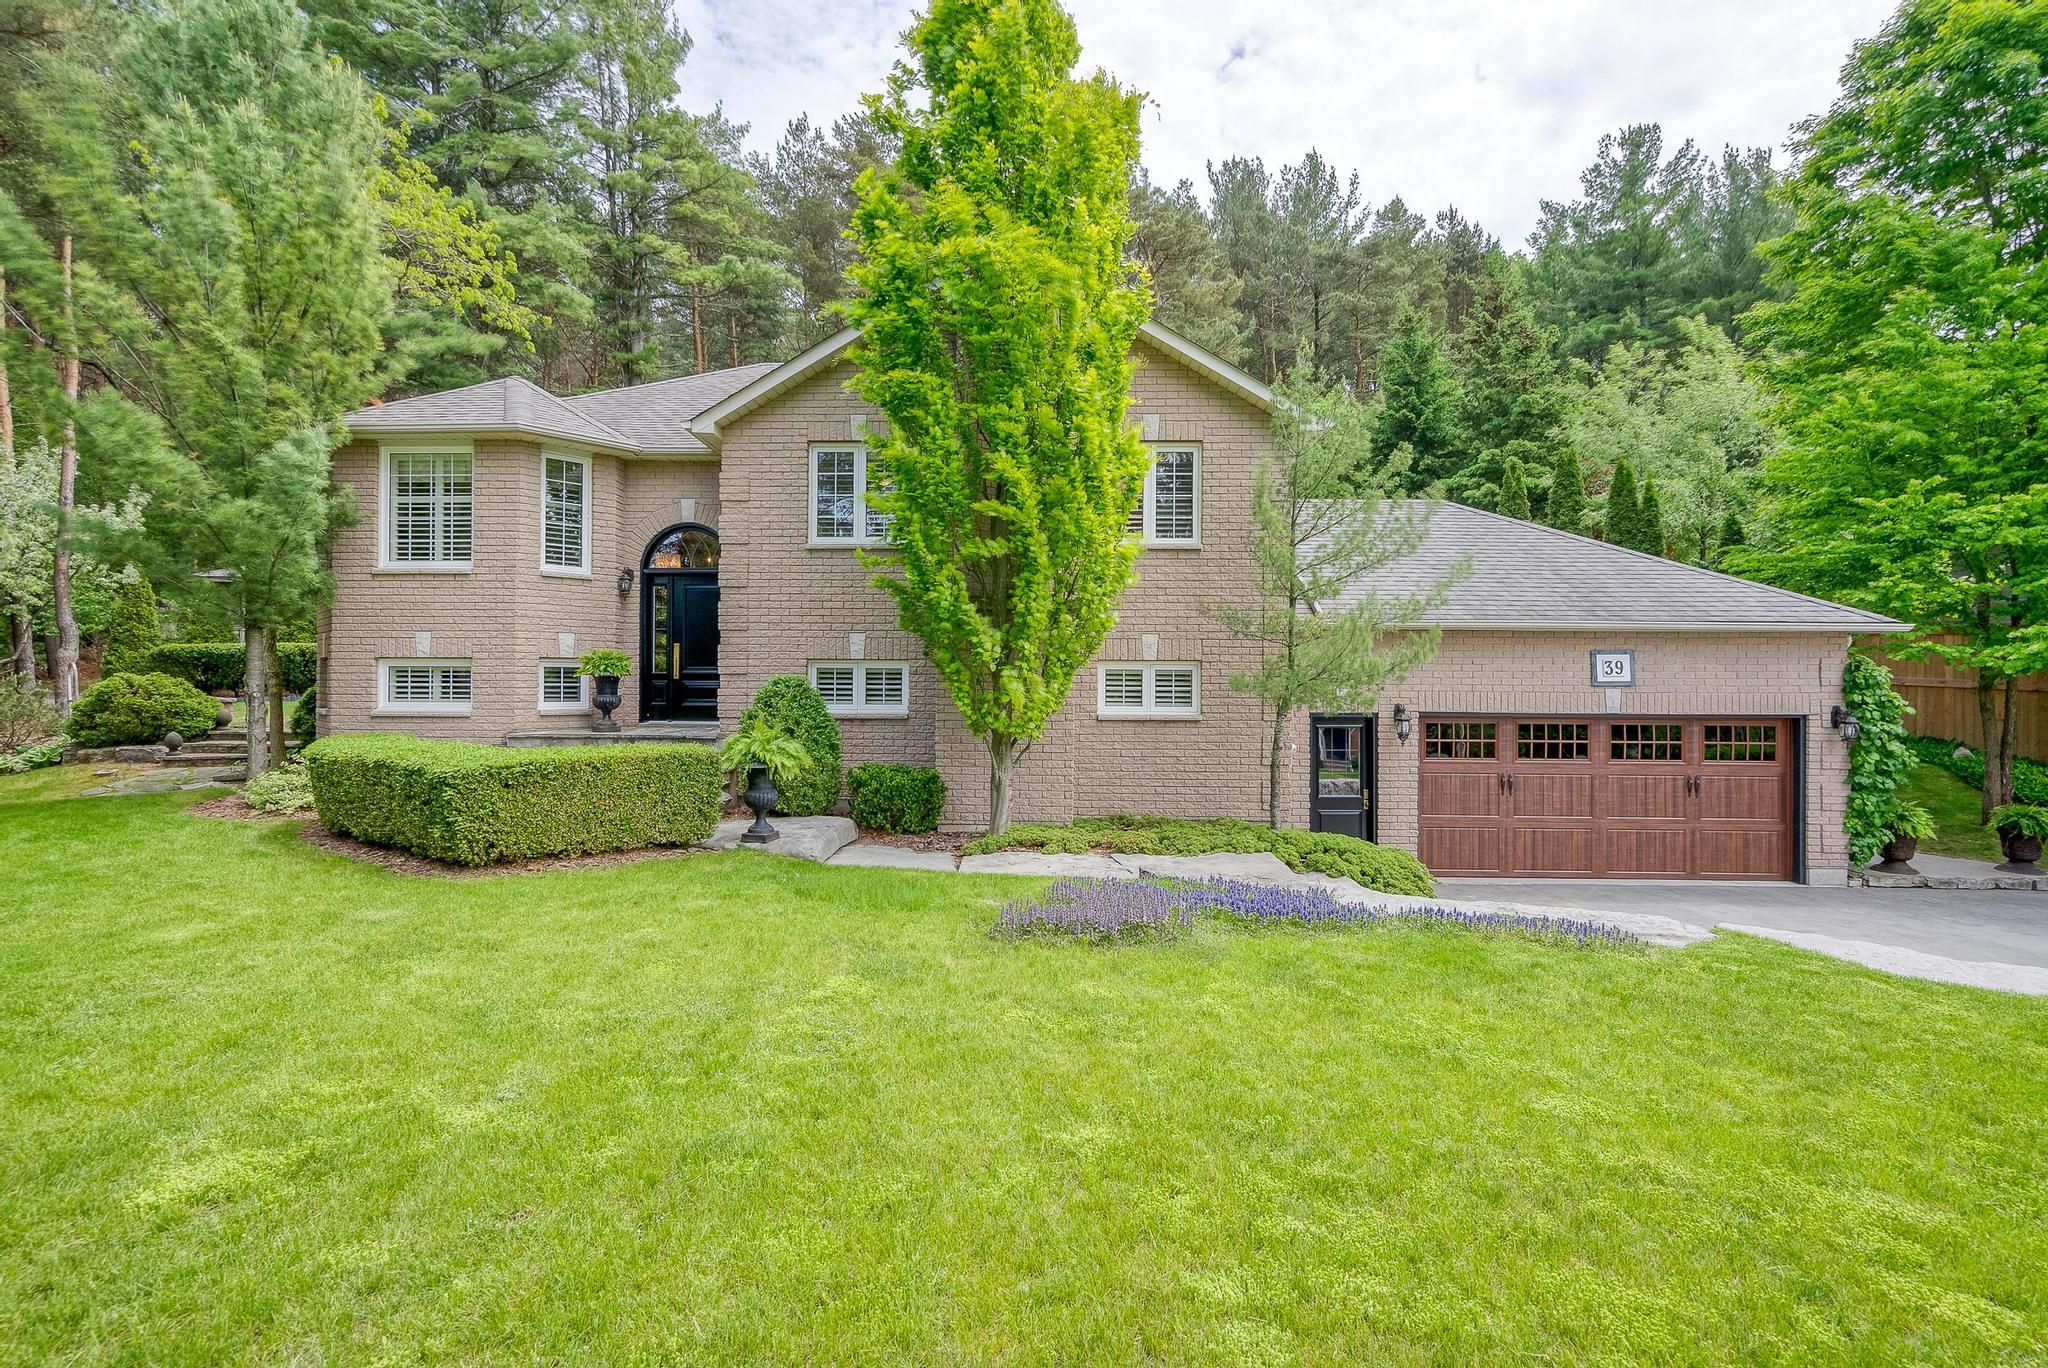 Main Photo: 39 Meadowland Drive in Hamilton Township: House for sale : MLS®# X5638155